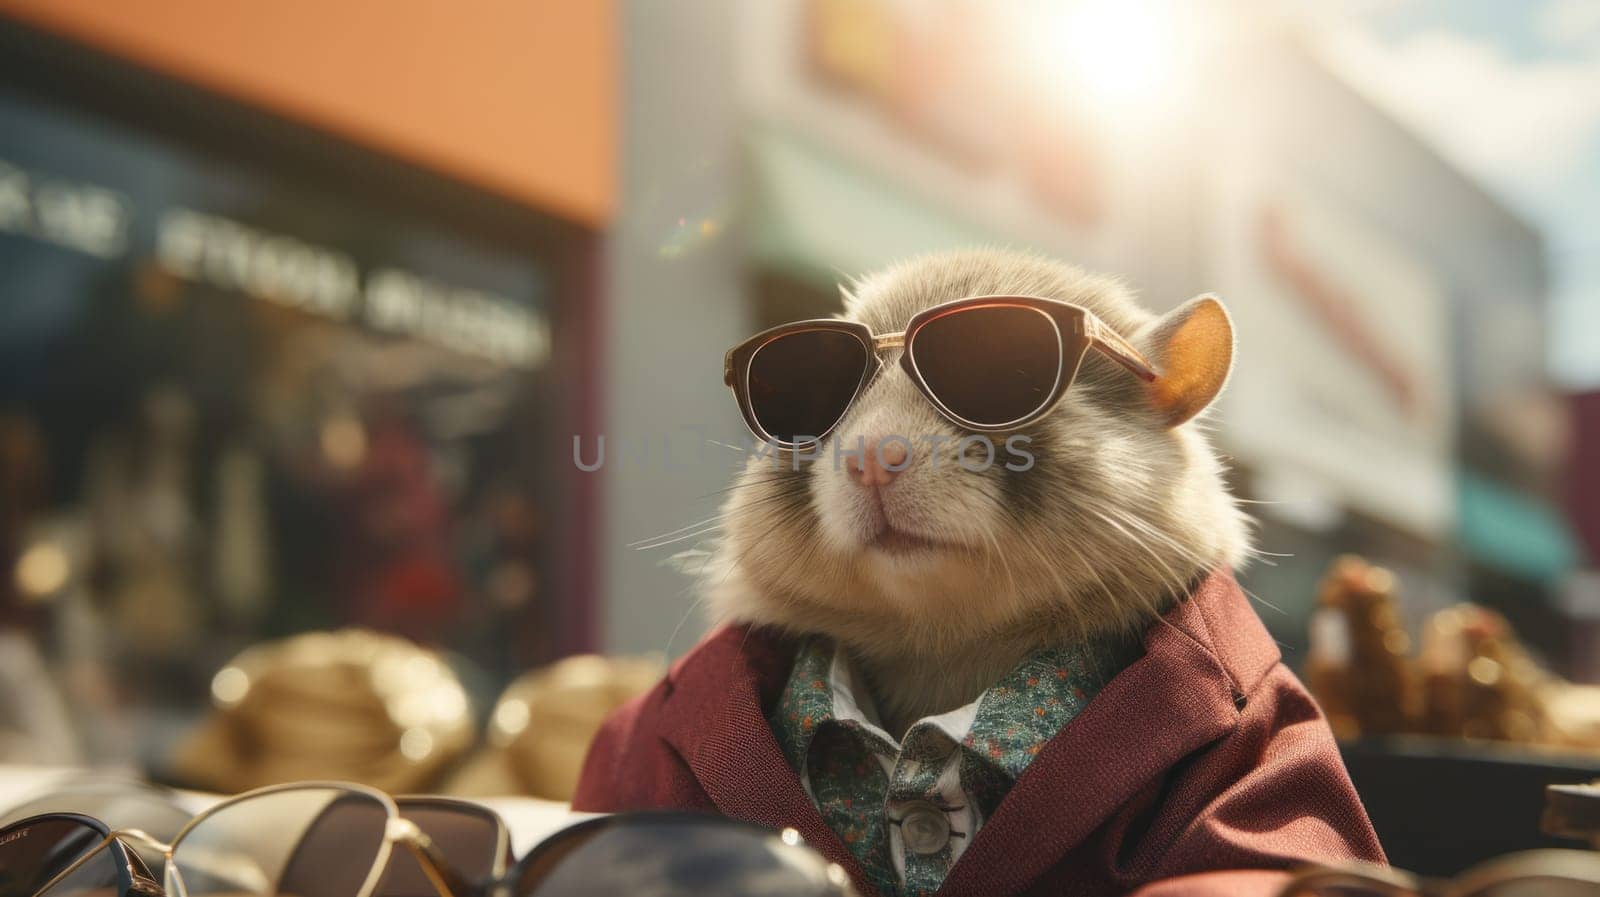 A hamster wearing a jacket and sunglasses sitting in front of some clothes